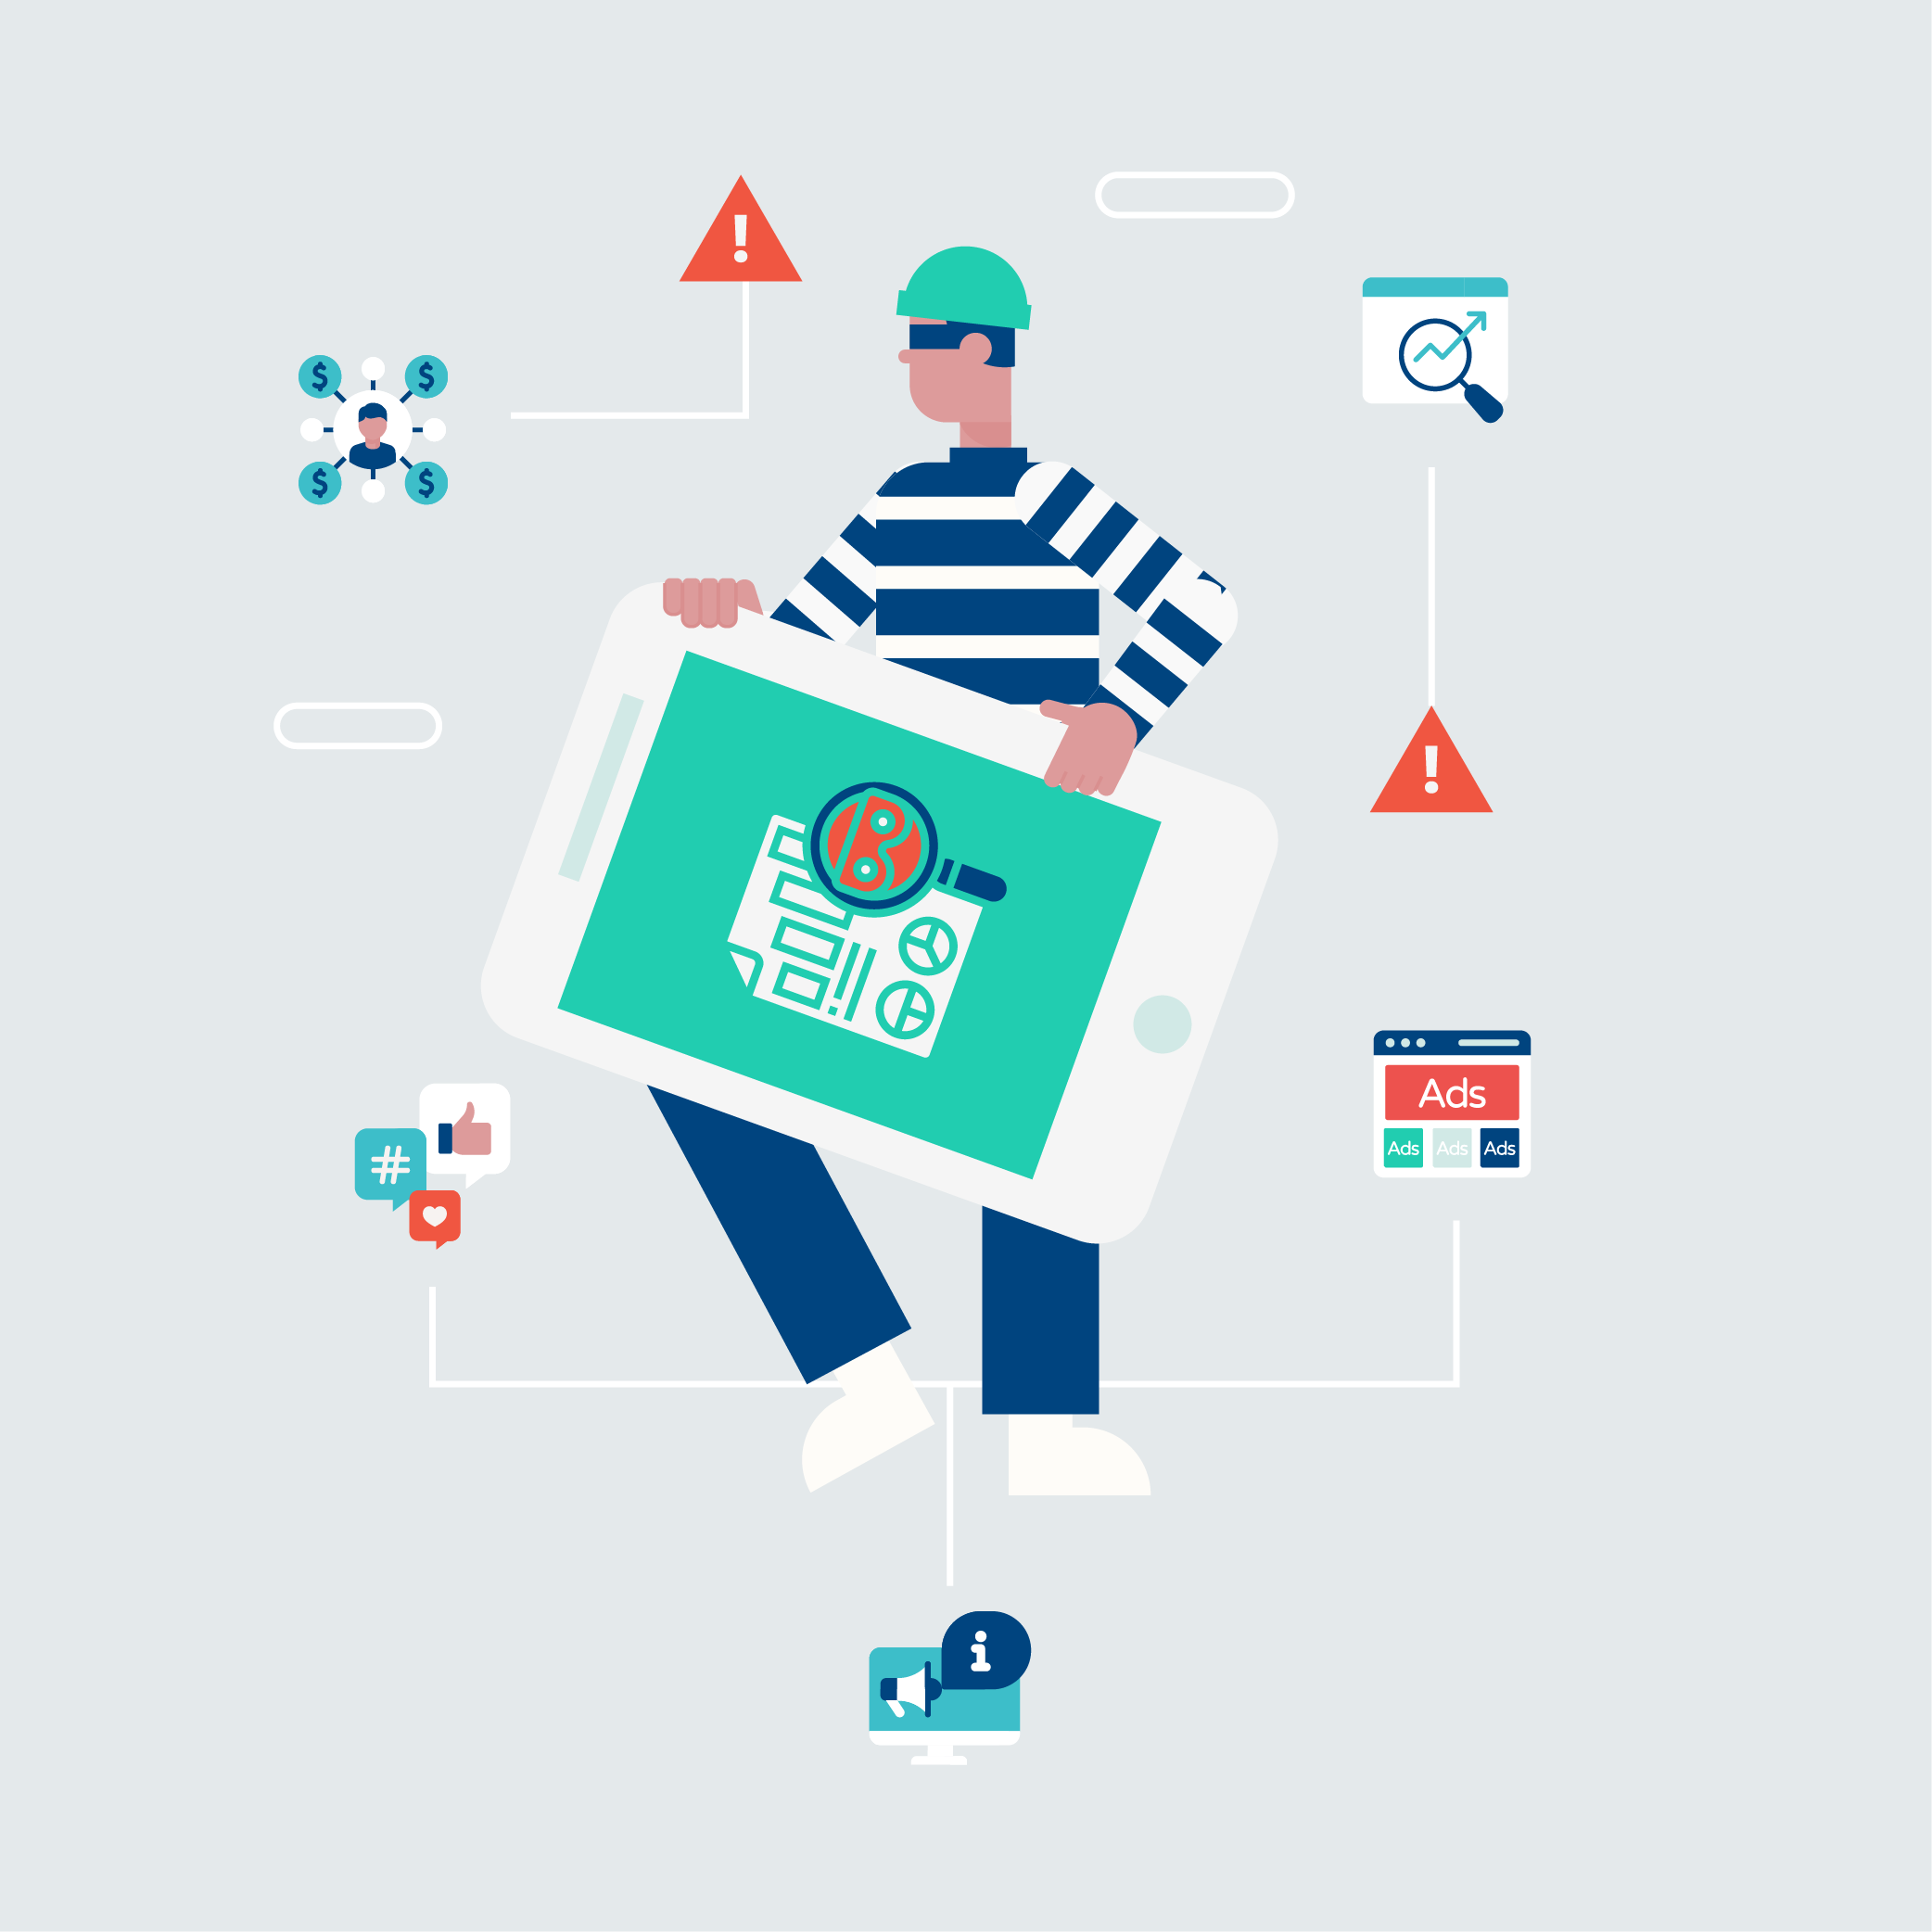 Marketing channels affected by ad fraud - Opticks featured image 